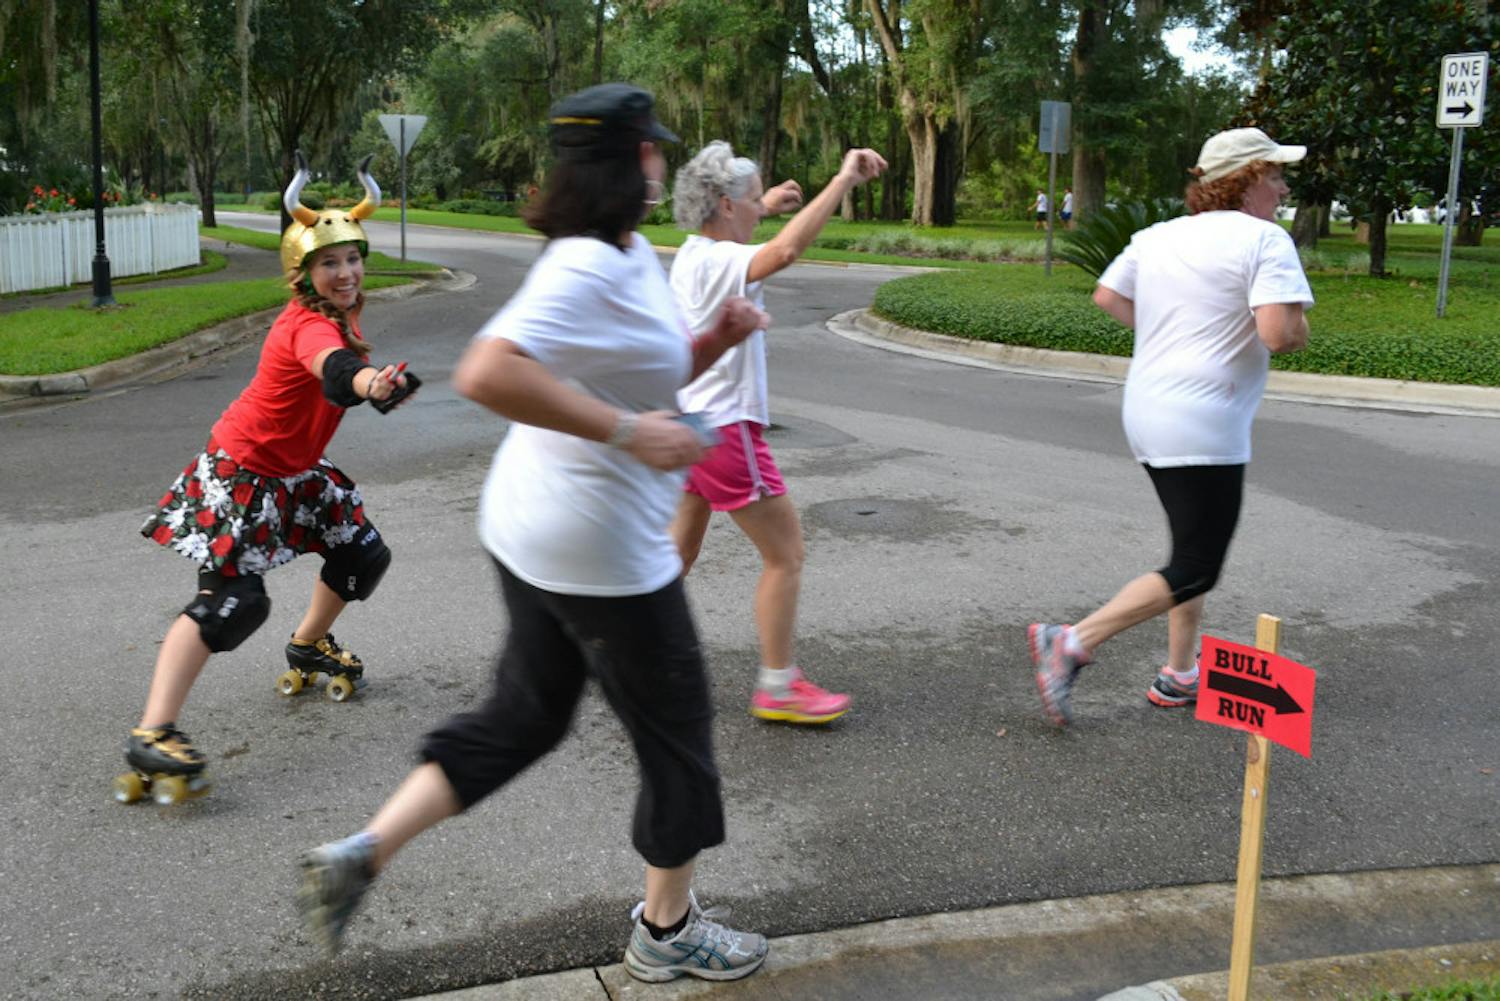 Lily Woodard, who goes by the derby name Slang Blade, chases a group of runners during the Bull Run 5K.